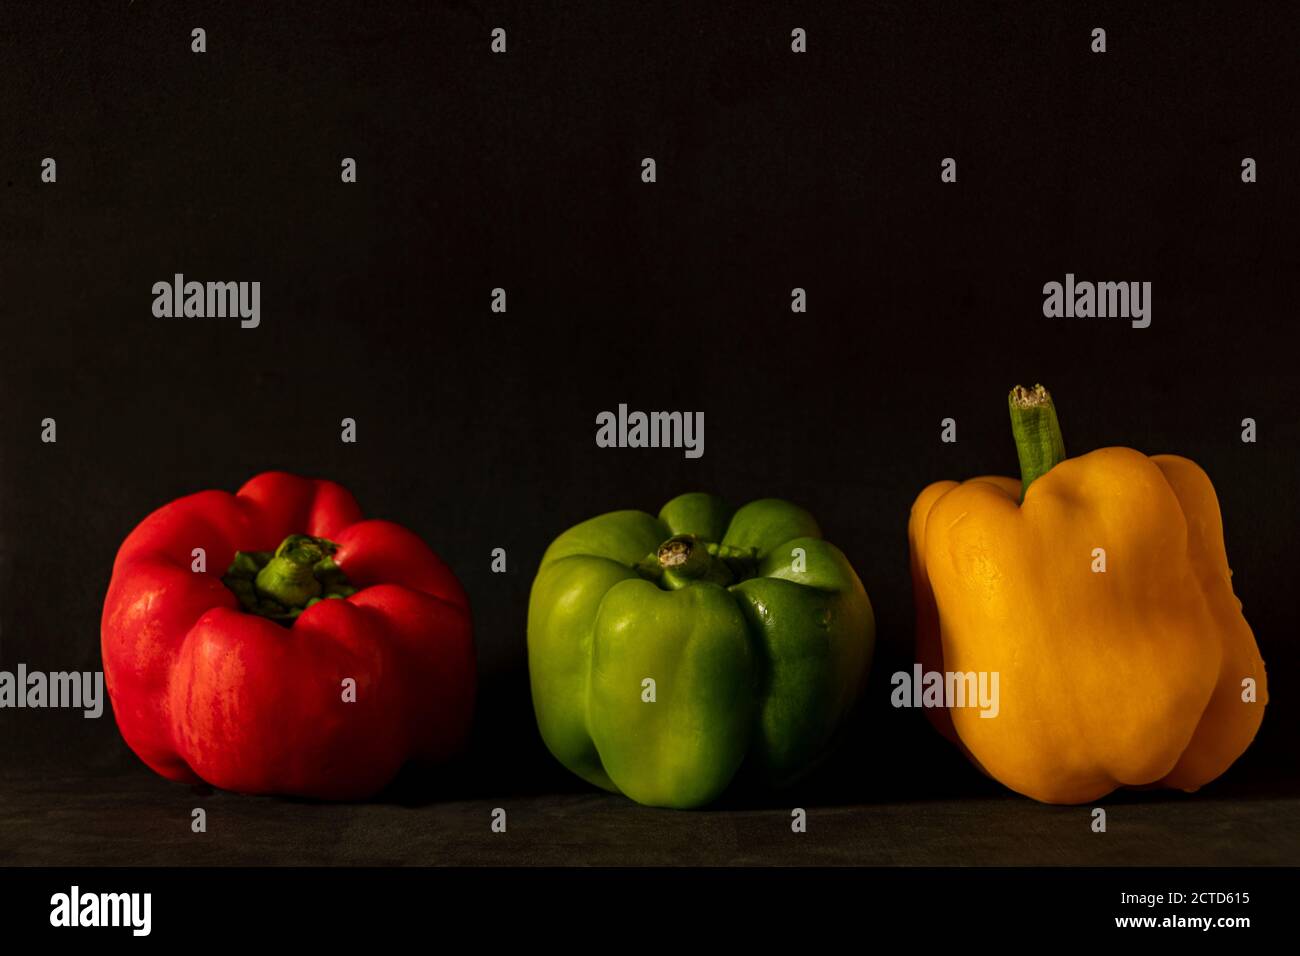 close-up of three bell peppers. red, green and yellow on a dark background Stock Photo